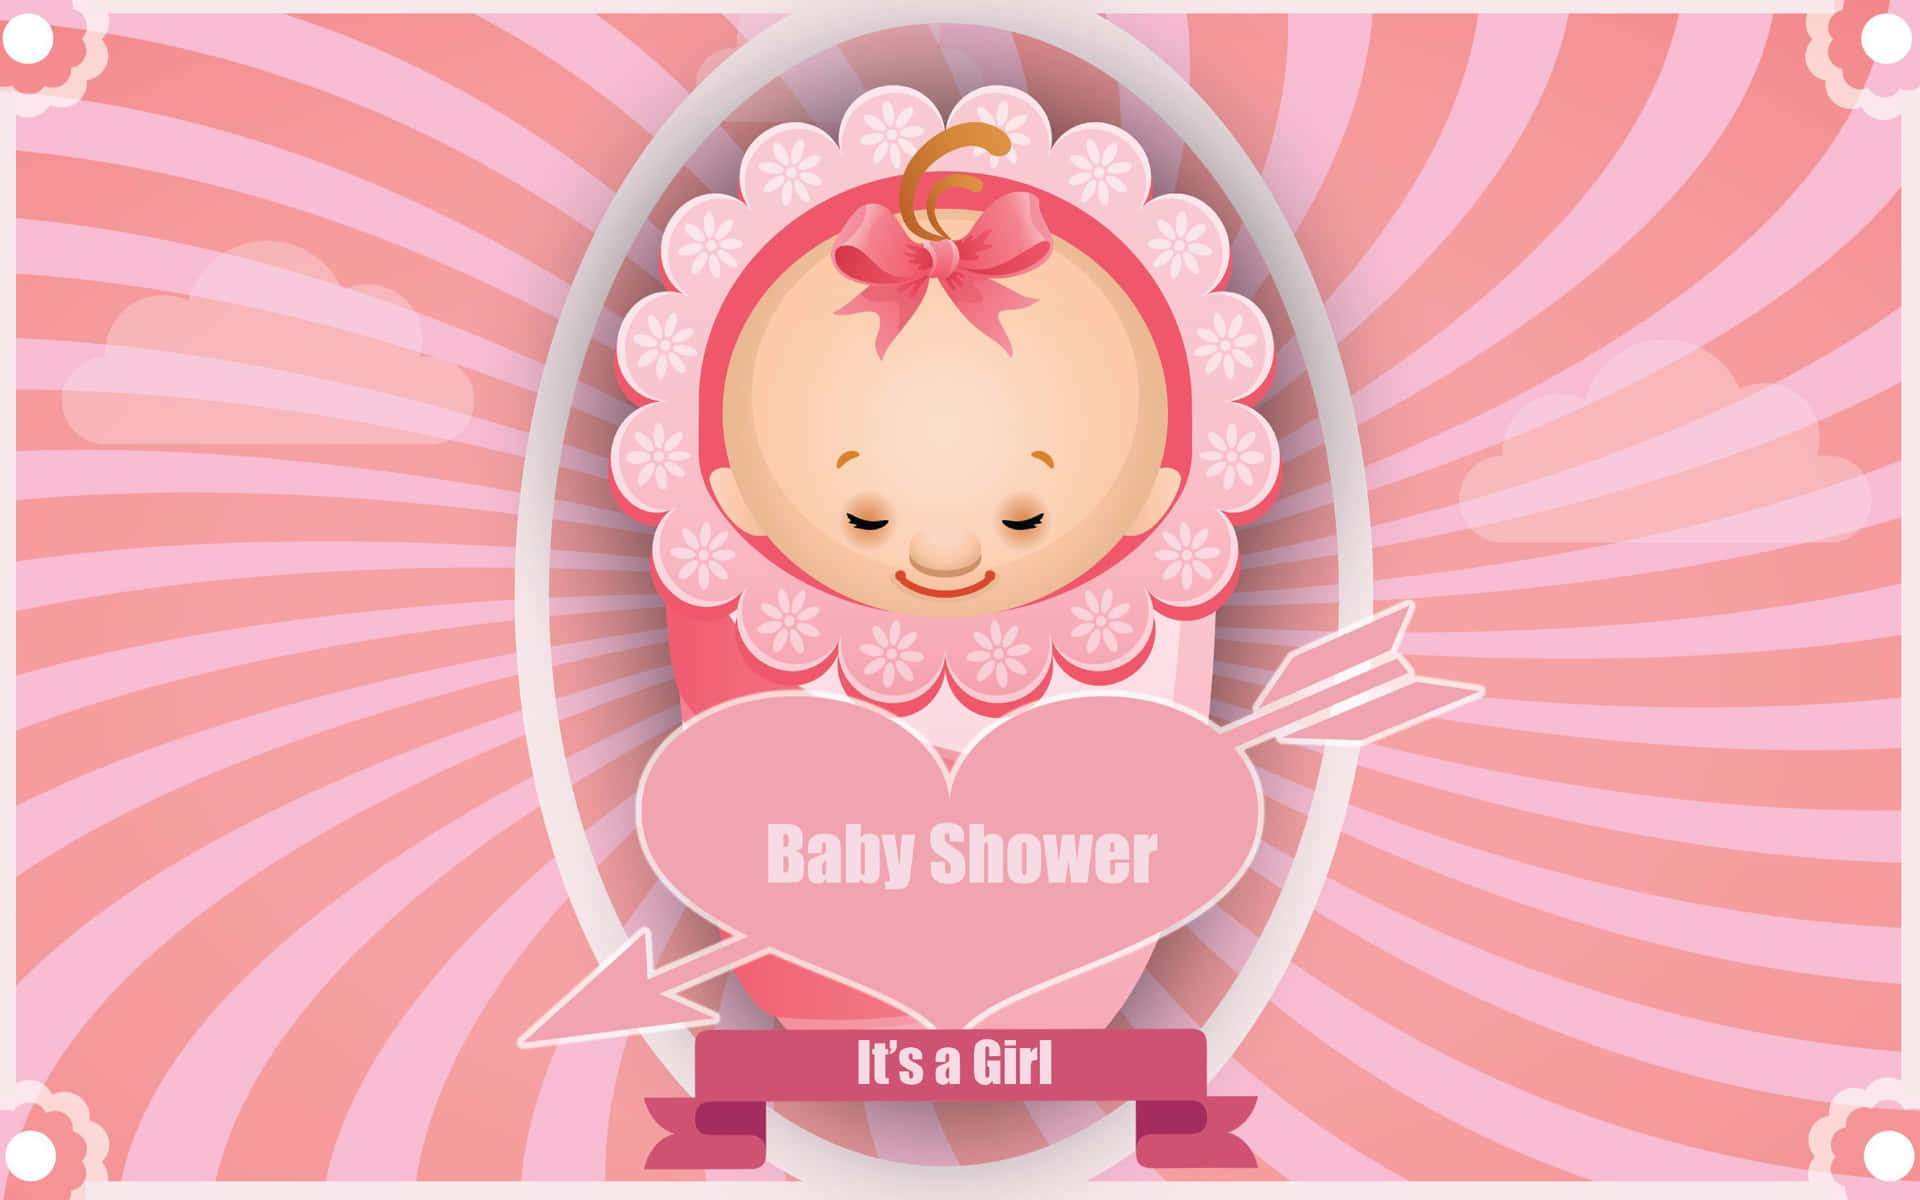 It’s A Girl Pink Baby Shower Vector Art Background